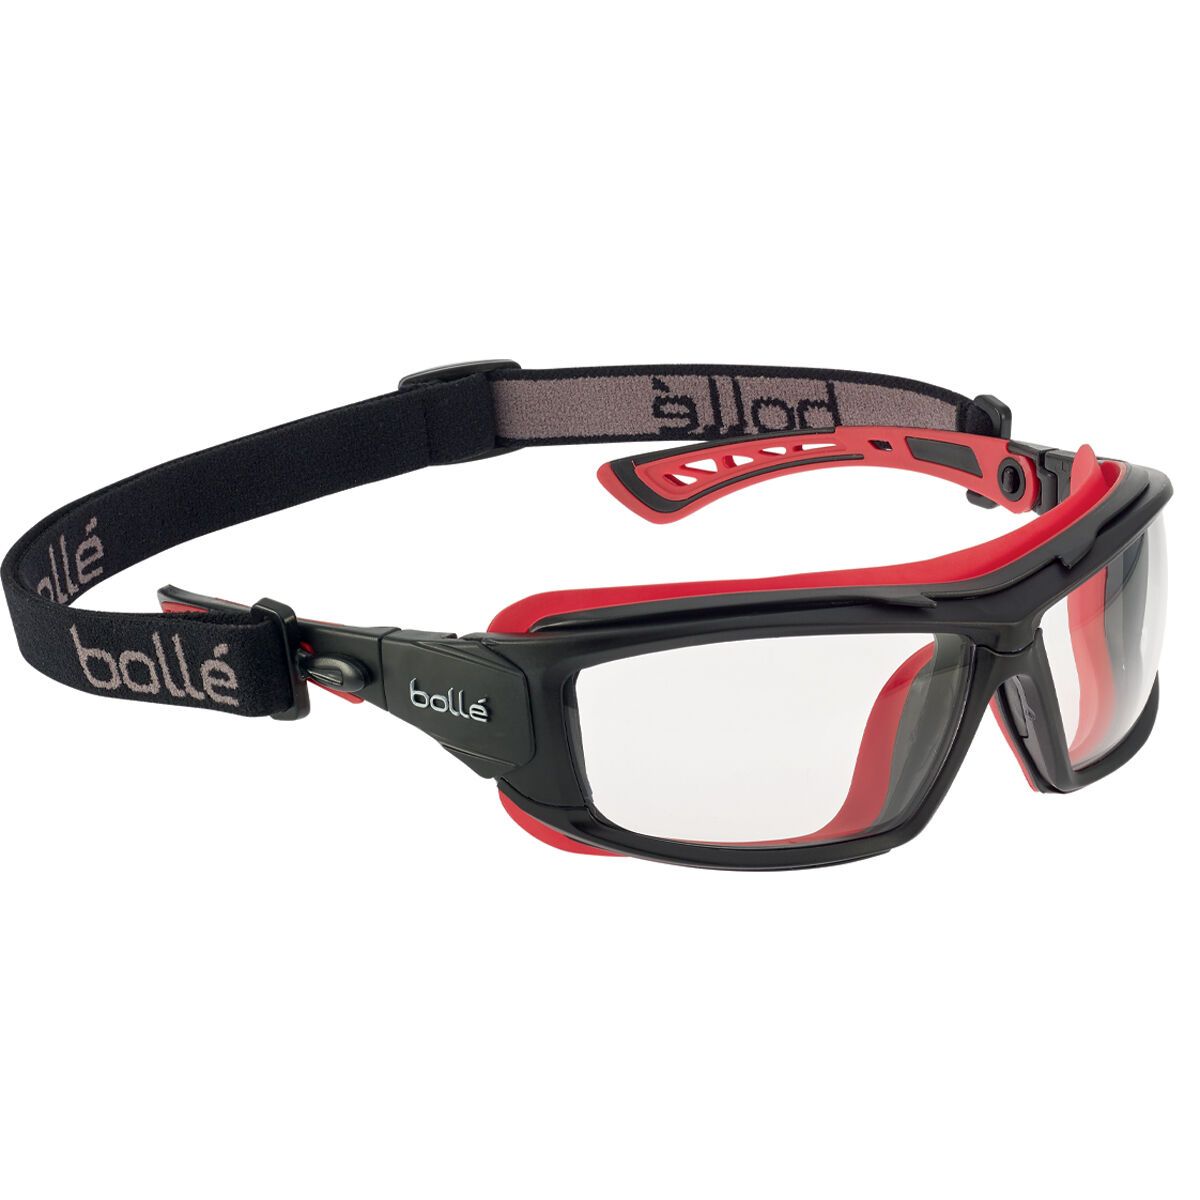 Bolle BOLTRACPSI Tracker Safety Glasses Vented Clear 